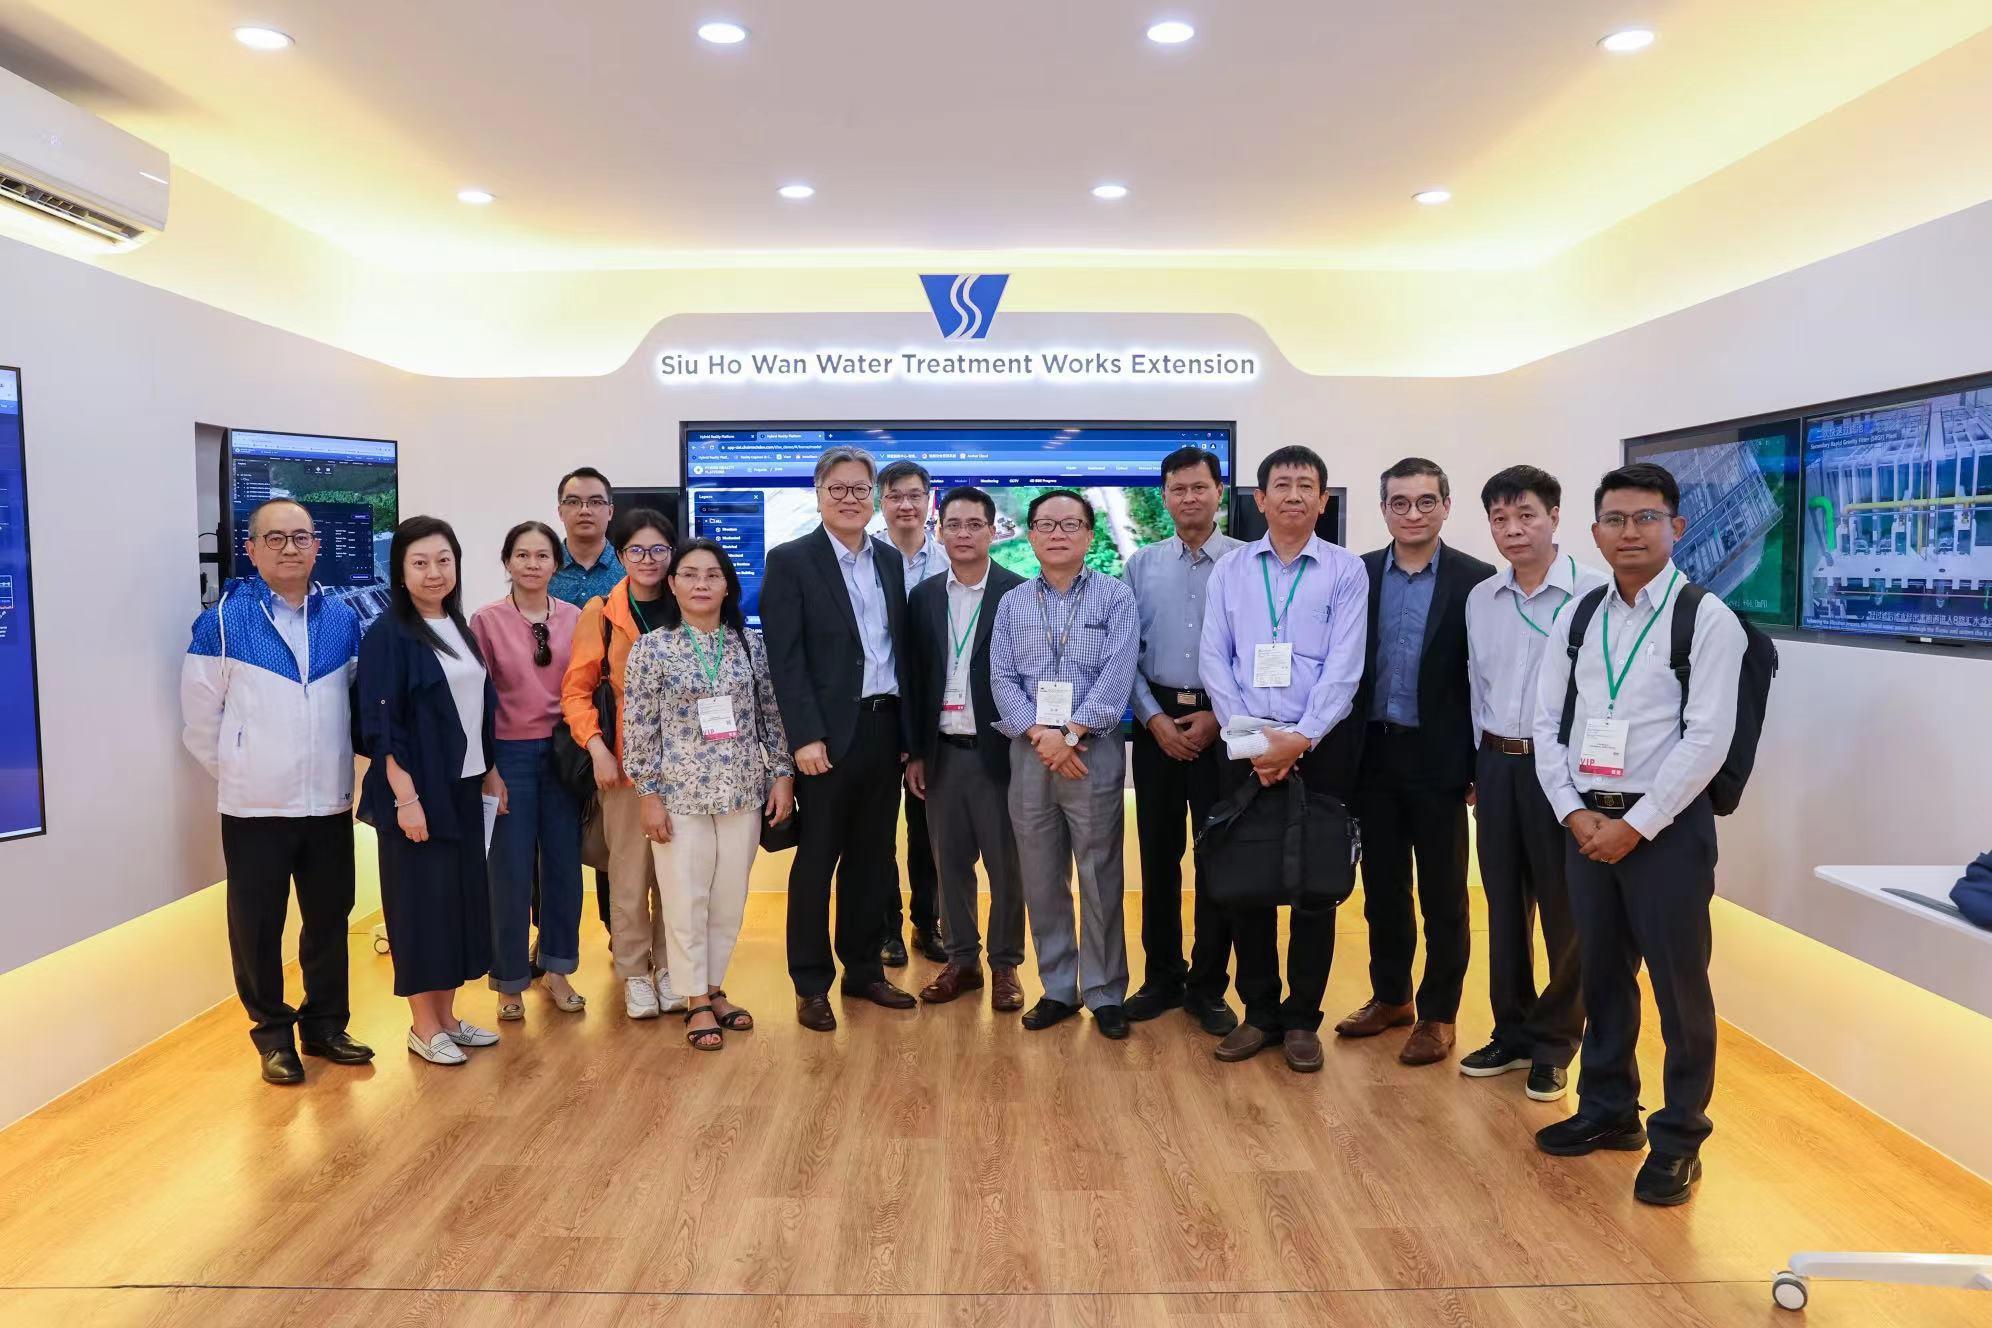 The Environmental Protection Department (EPD) arranged delegations from the Belt and Road (B&R) countries (namely Laos, Vietnam and Myanmar) and representatives from the Research Center for Eco-Environmental Sciences of the Chinese Academy of Sciences attending Eco Expo Asia to visit local aquaculture farms, water treatment works and sewage treatment facilities. Photo shows the B&R delegations visiting the Water Supplies Department 's Siu Ho Wan Water Treatment Works with EPD officers on October 27.